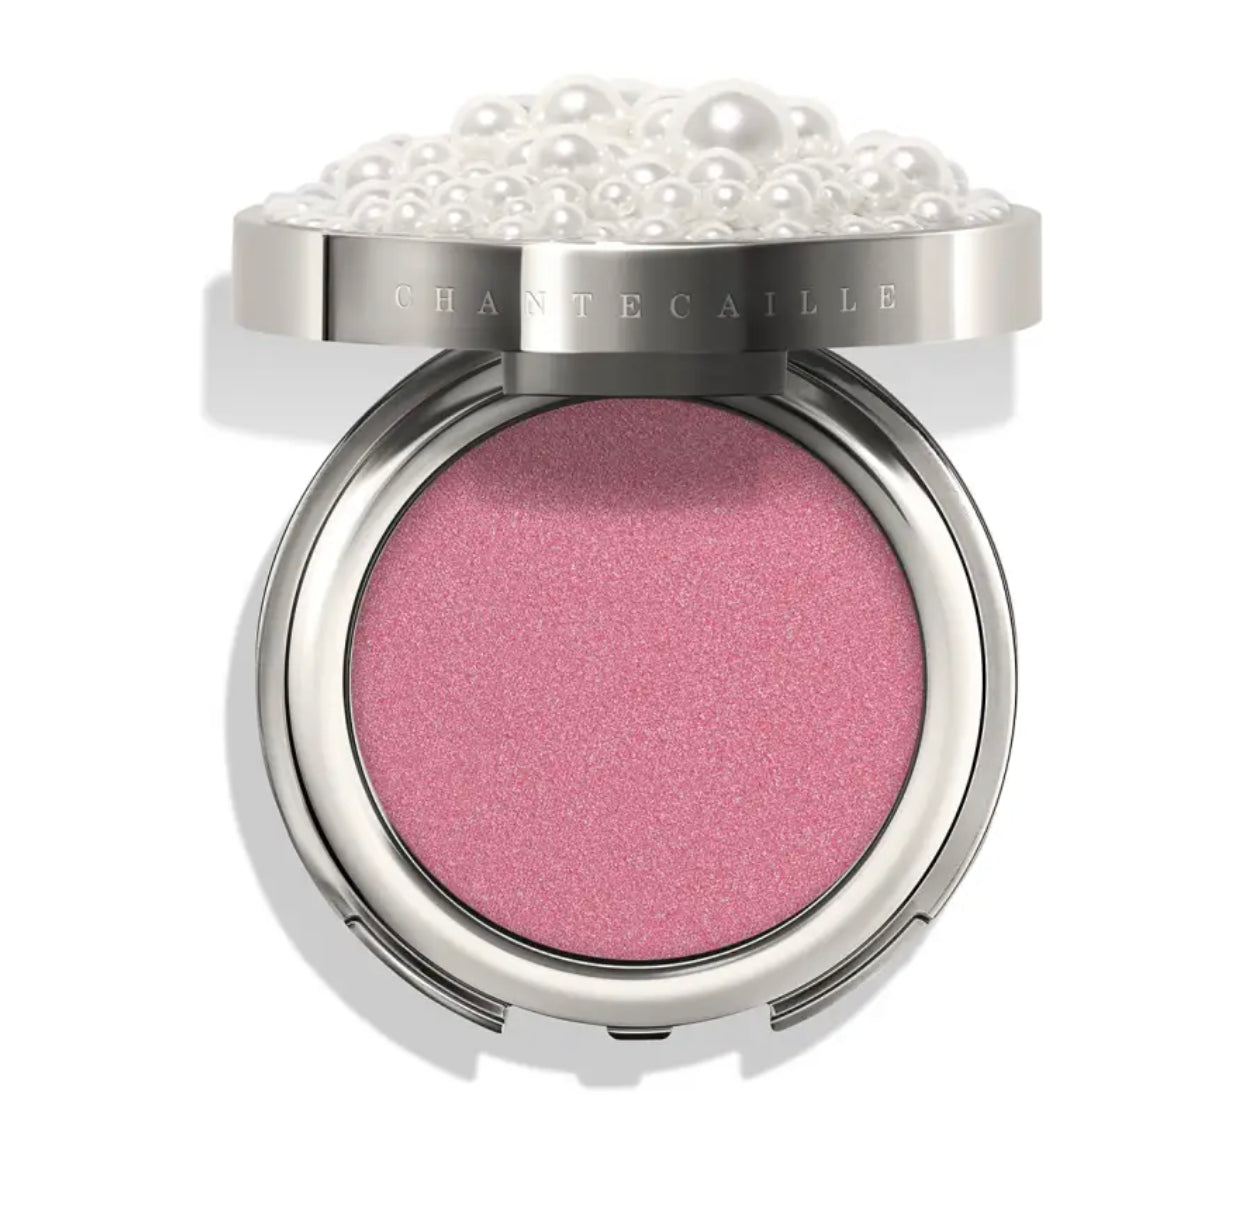 CHANTECAILLE, NEW RELEASE!!! ROUGE PERLE LIMITED EDITION BLUSH